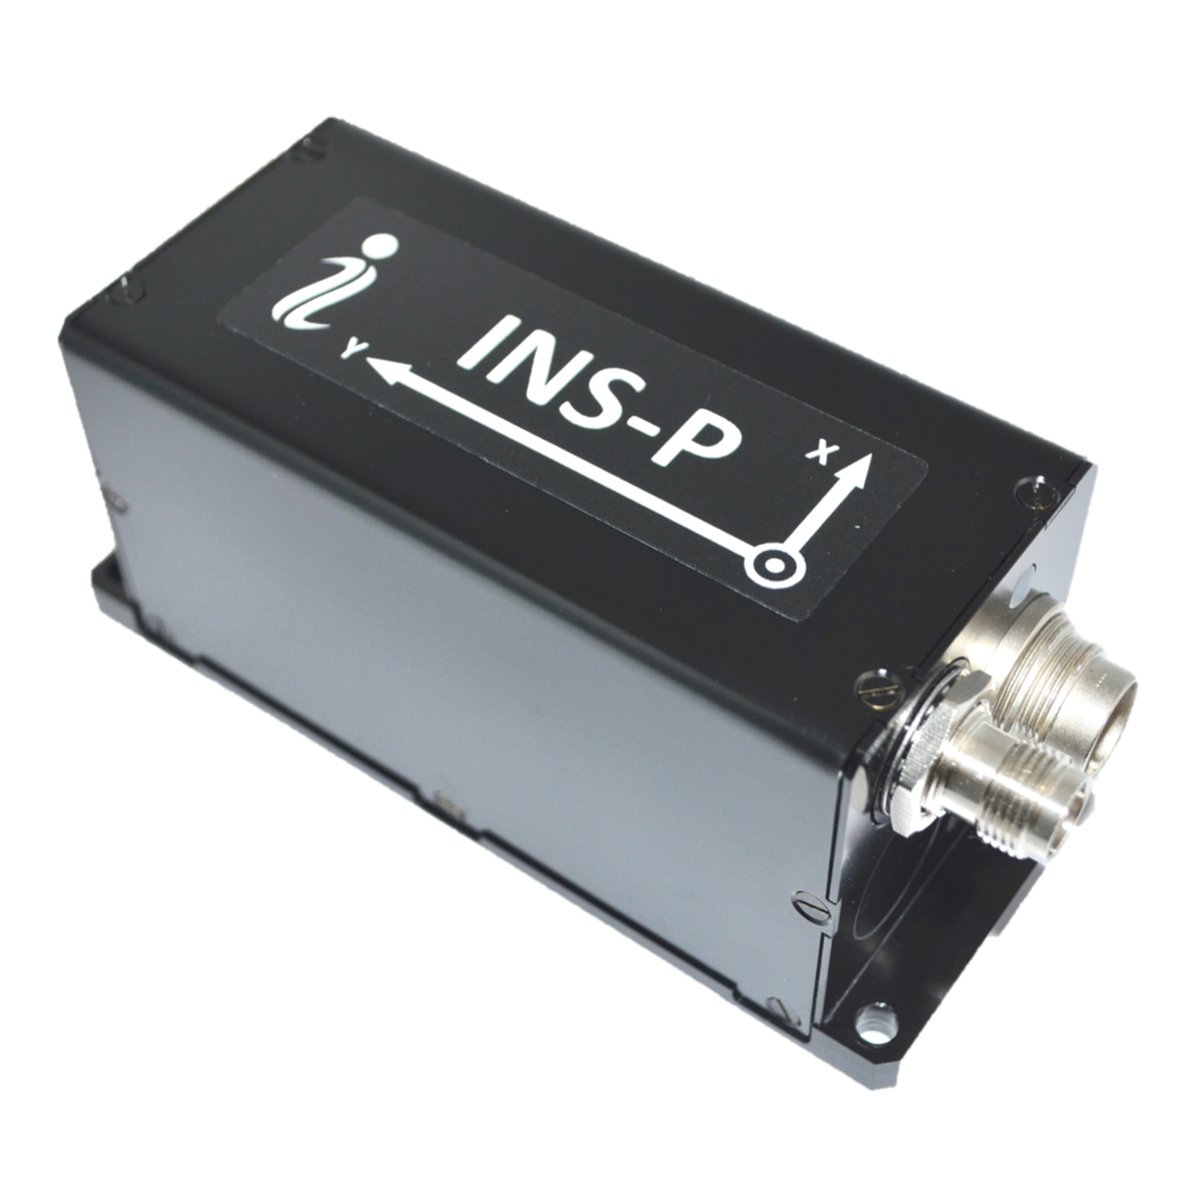 INS-P - Professional Version of Single Antenna GPS-Aided Inertial Navigation System